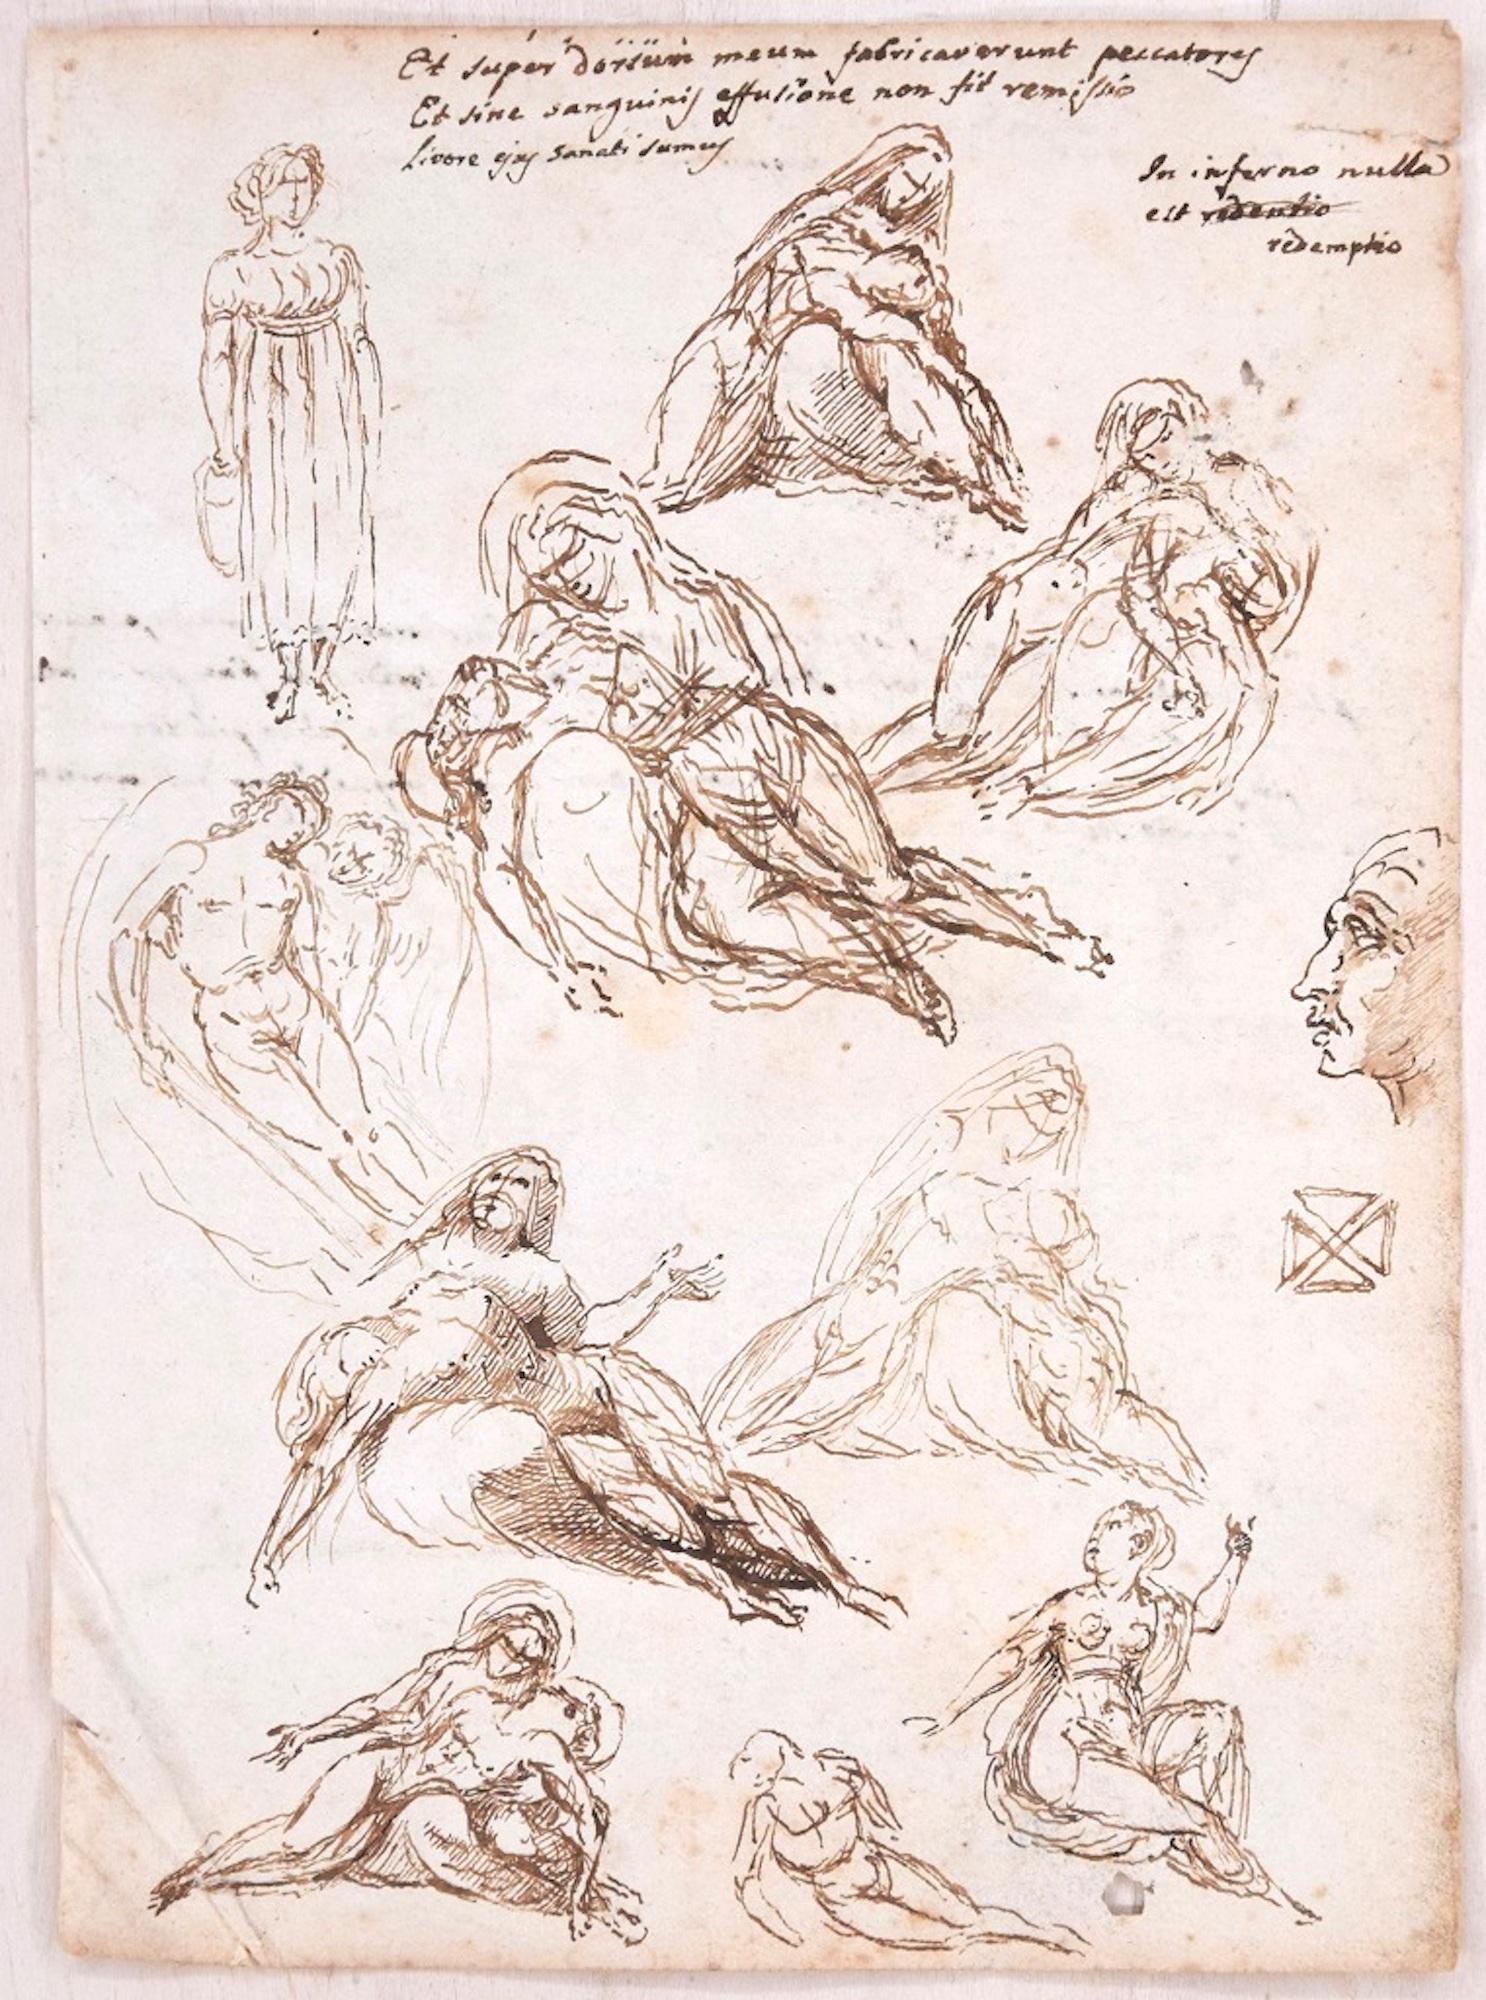 Studies and notes - Ink and Pencil on Paper y Anonymous Master - Early 1800